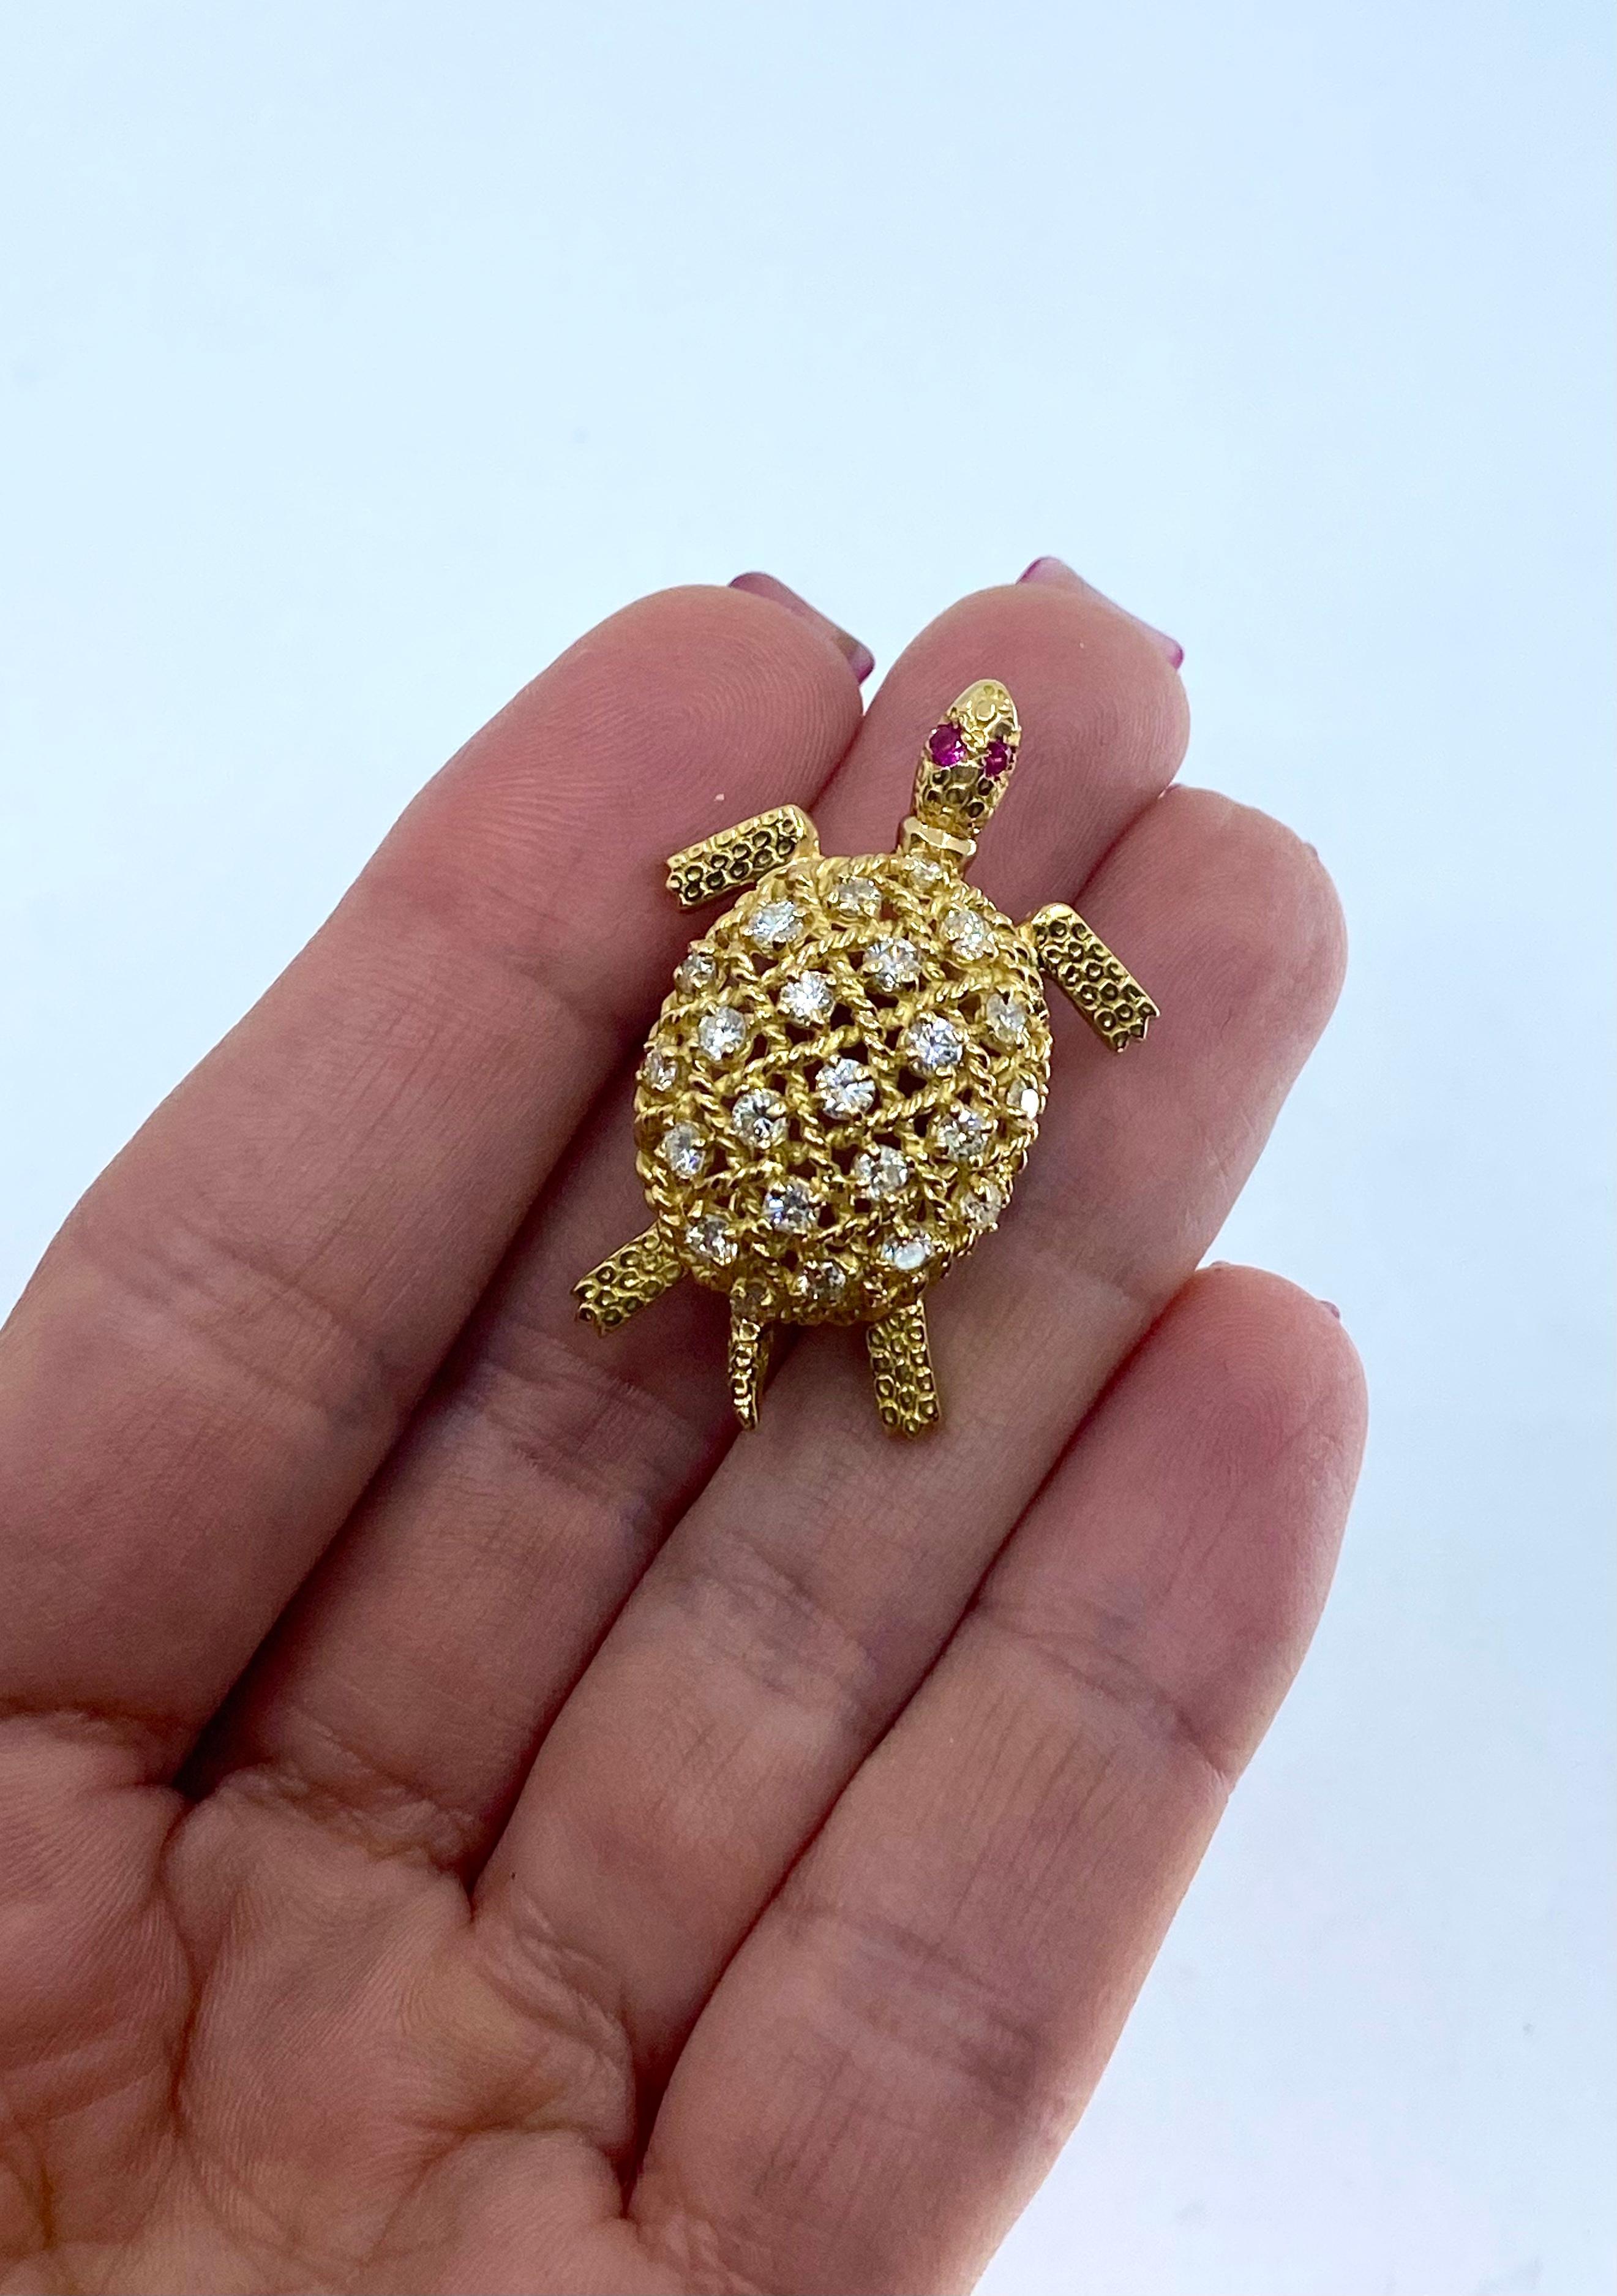 A cute and elegant Turtle brooch by Cartier. It’s made of 18k gold, features diamond and rubies.
The turtle’s body is open work, crafted of twisted and crisscrossed gold wires. The diamonds are four-prong set, mounted in between of the wires’